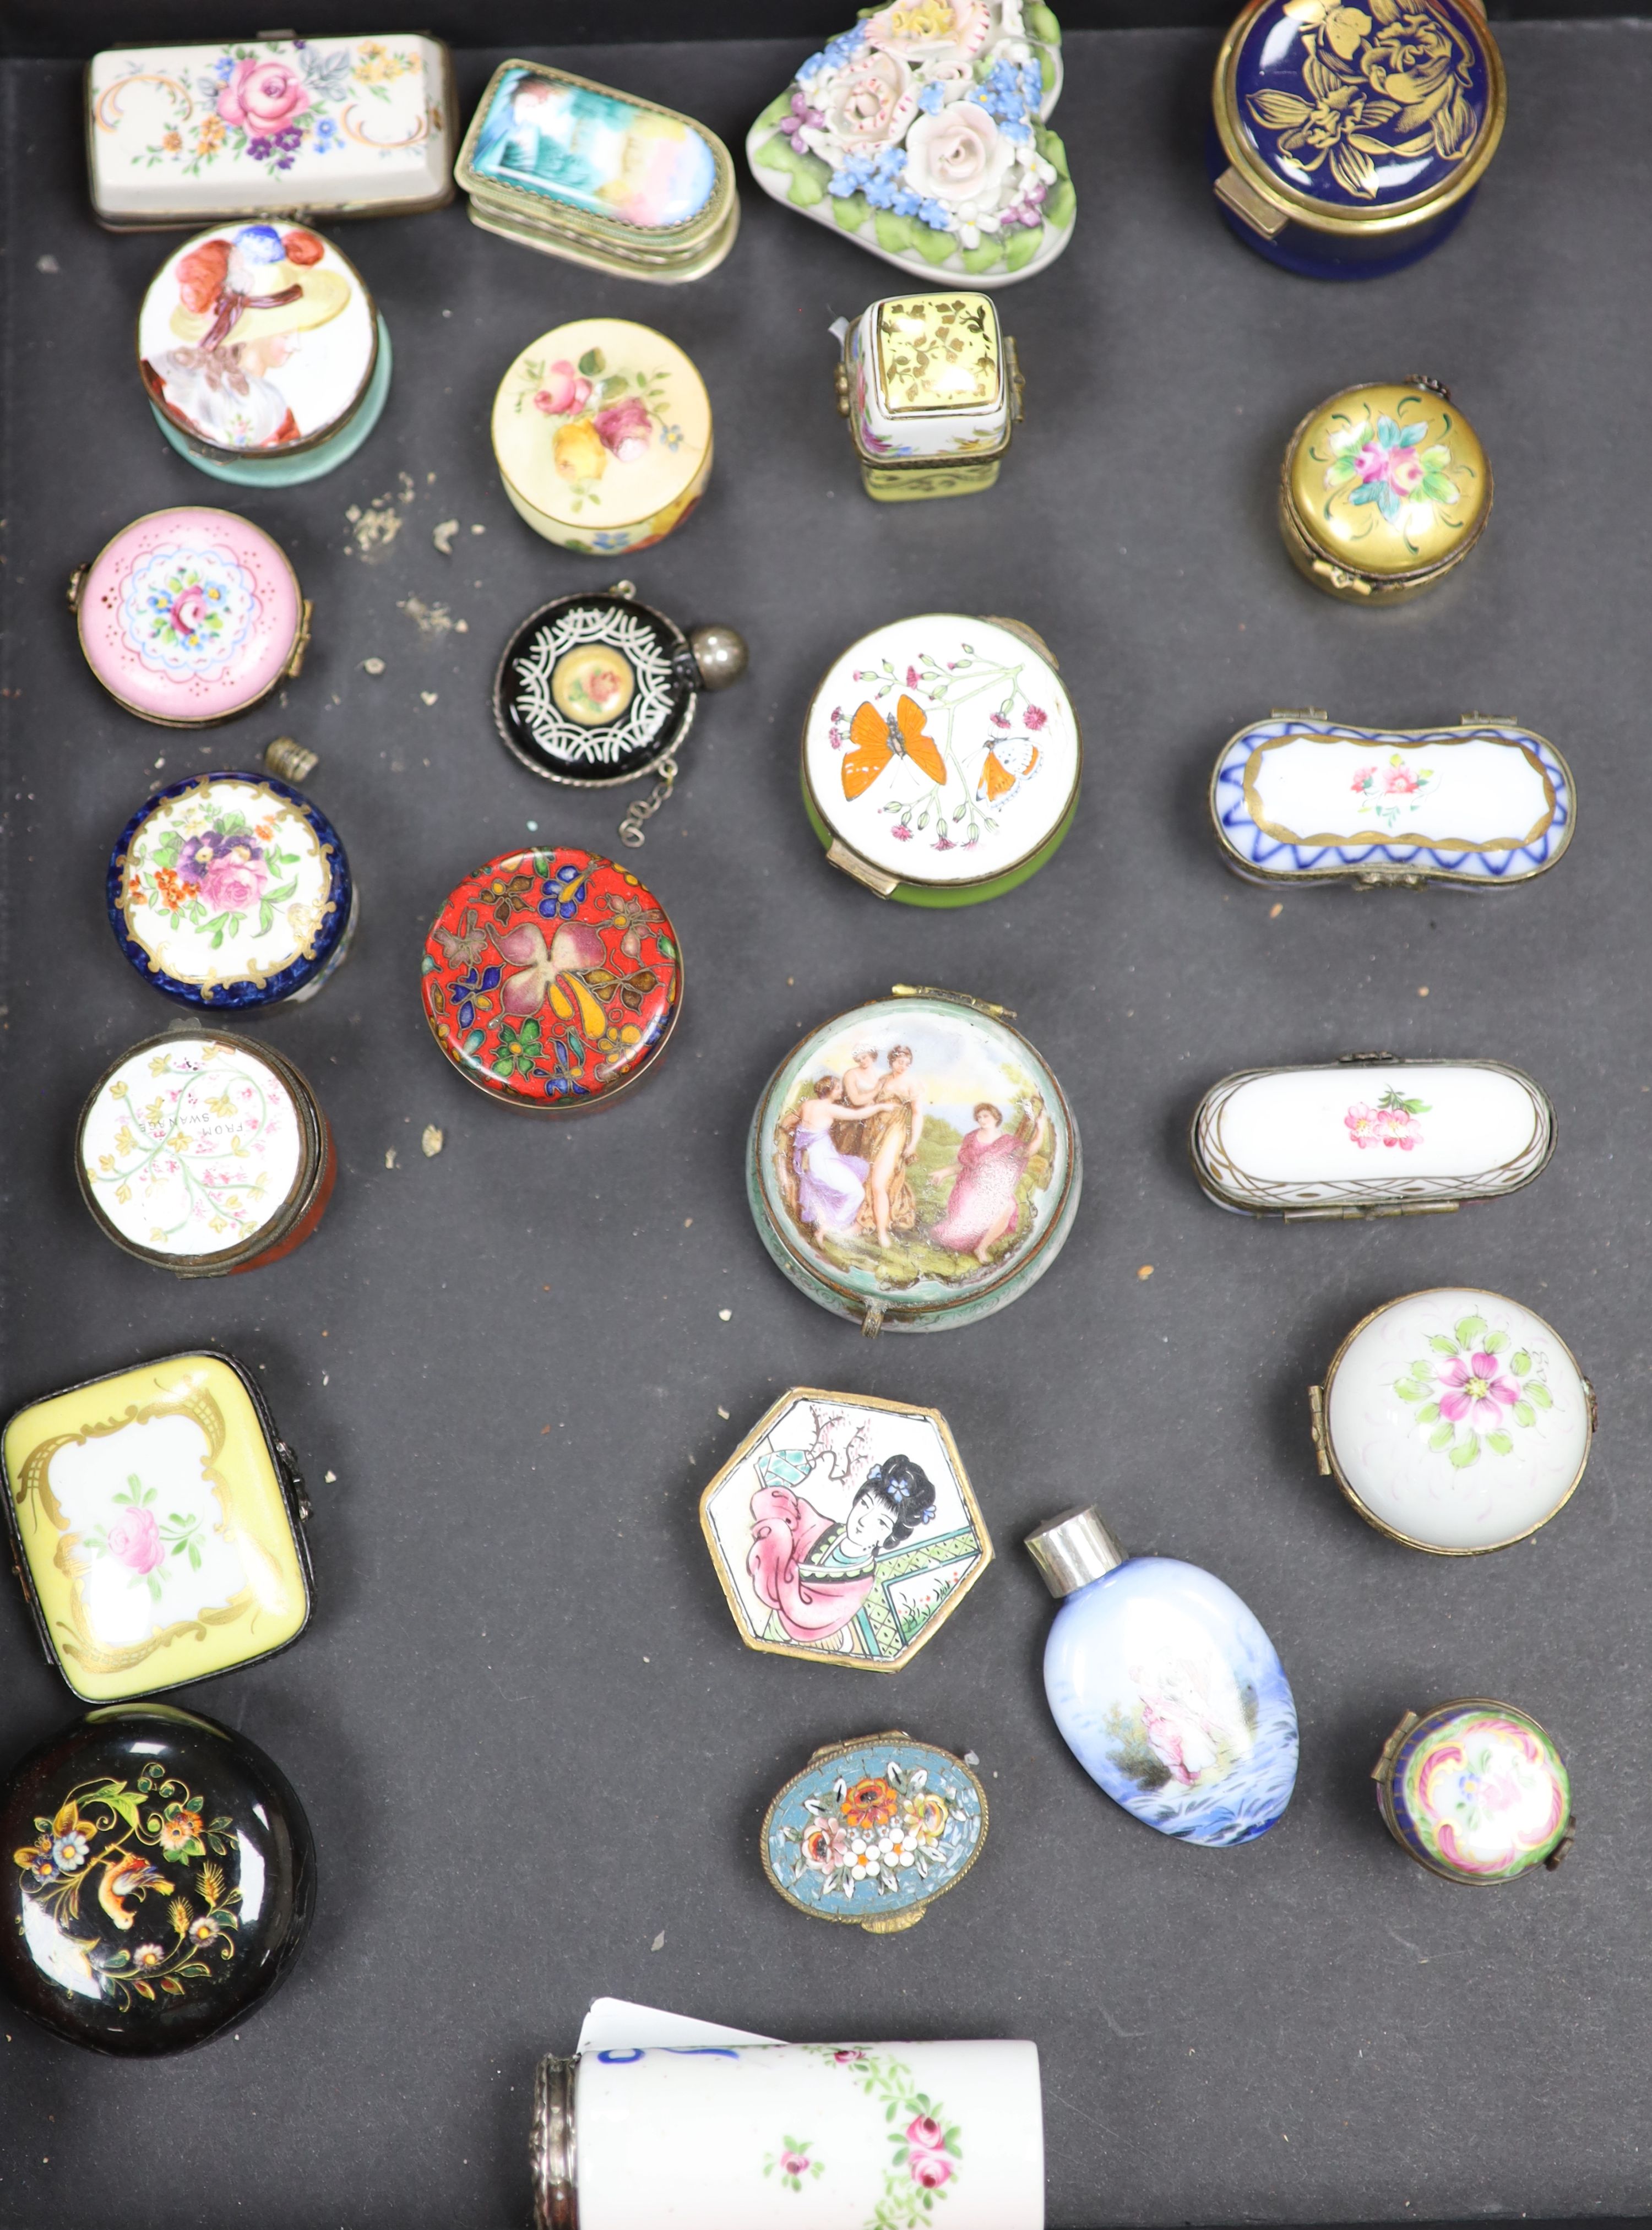 Twenty five limoges and Worcester and other ceramic and enamel boxes